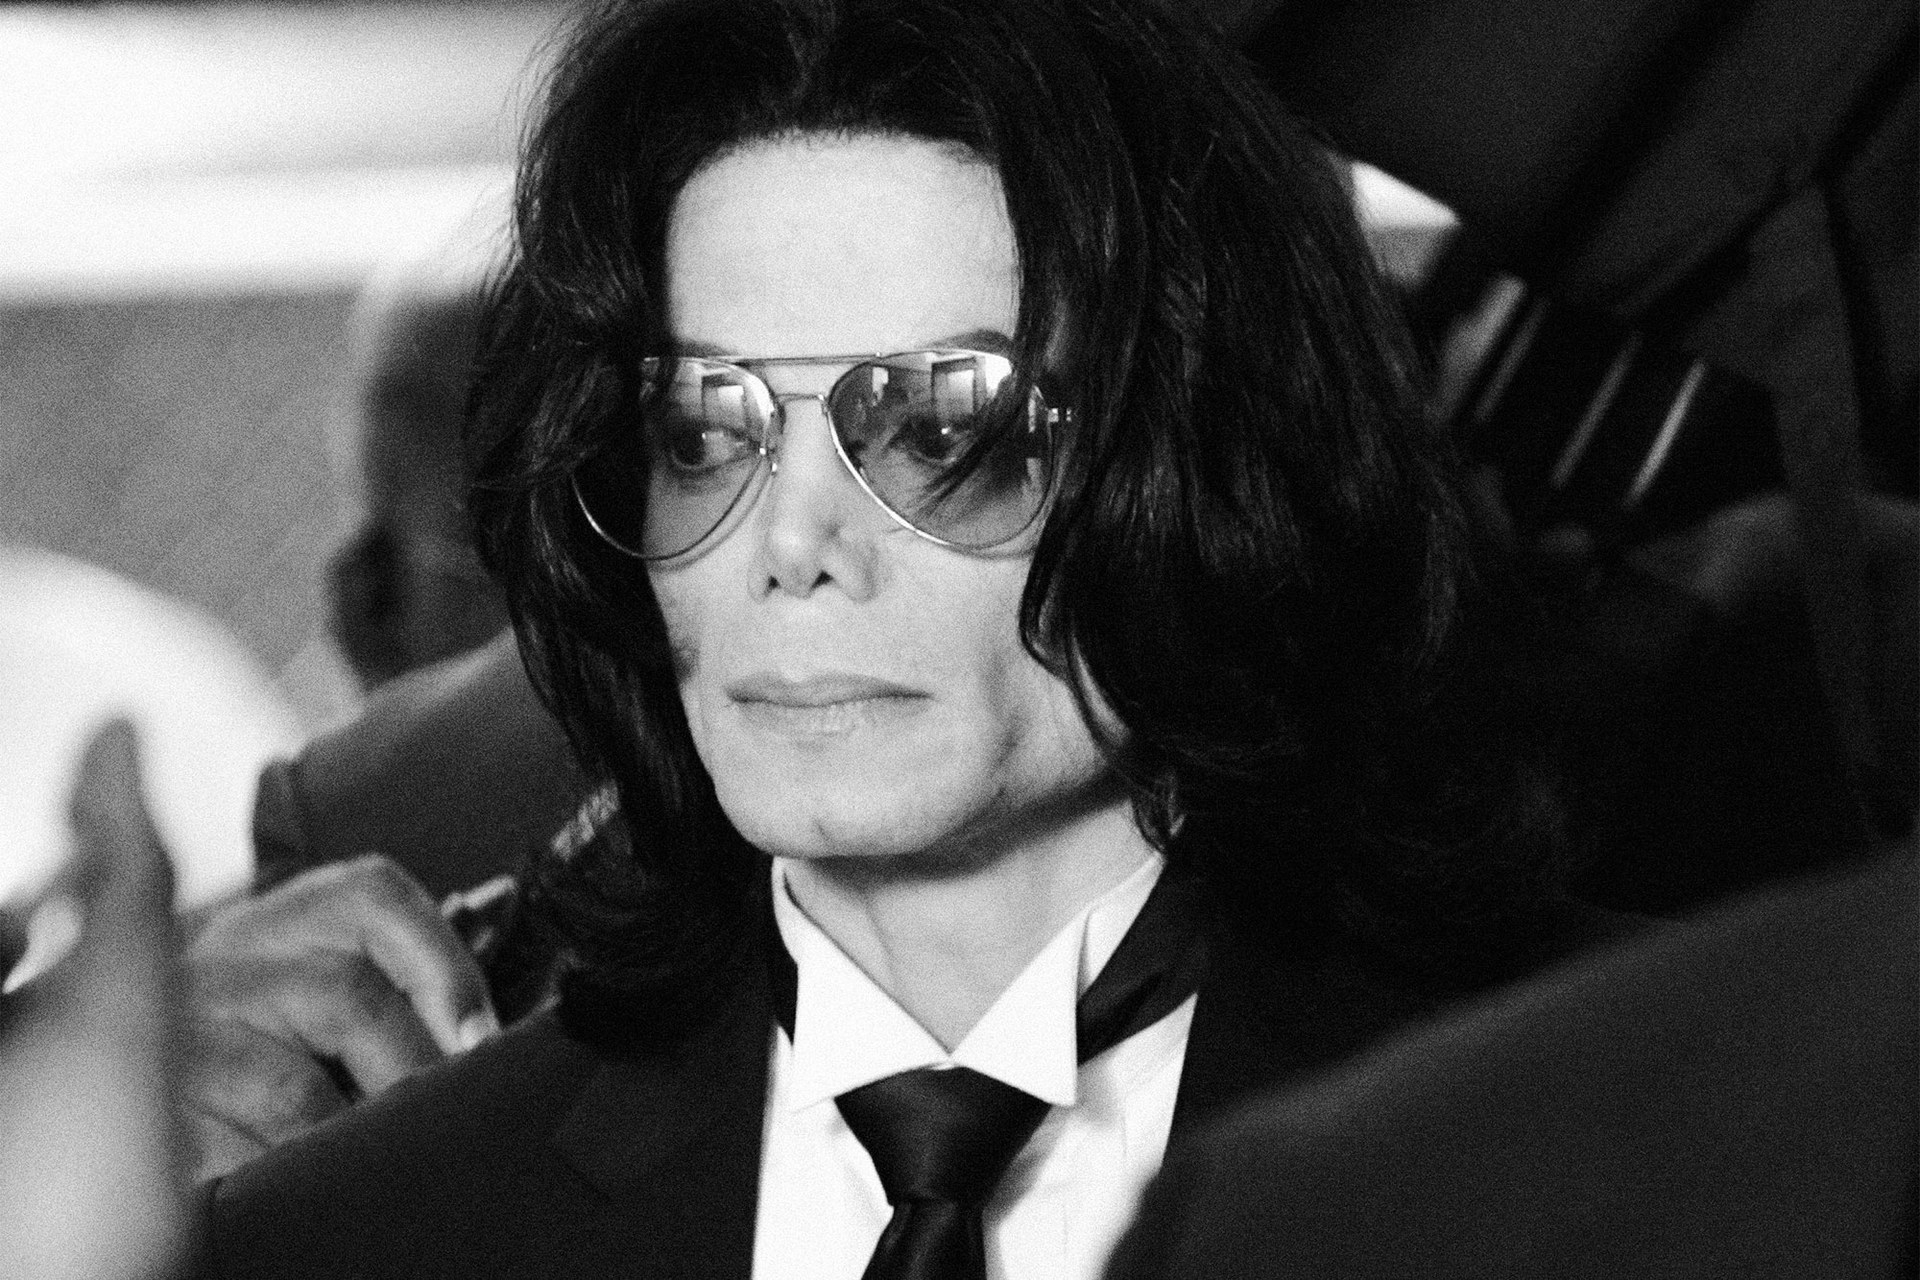 Jackson Family Responds to Leaving Neverland by Releasing 30-Minute Documentary of Their Own